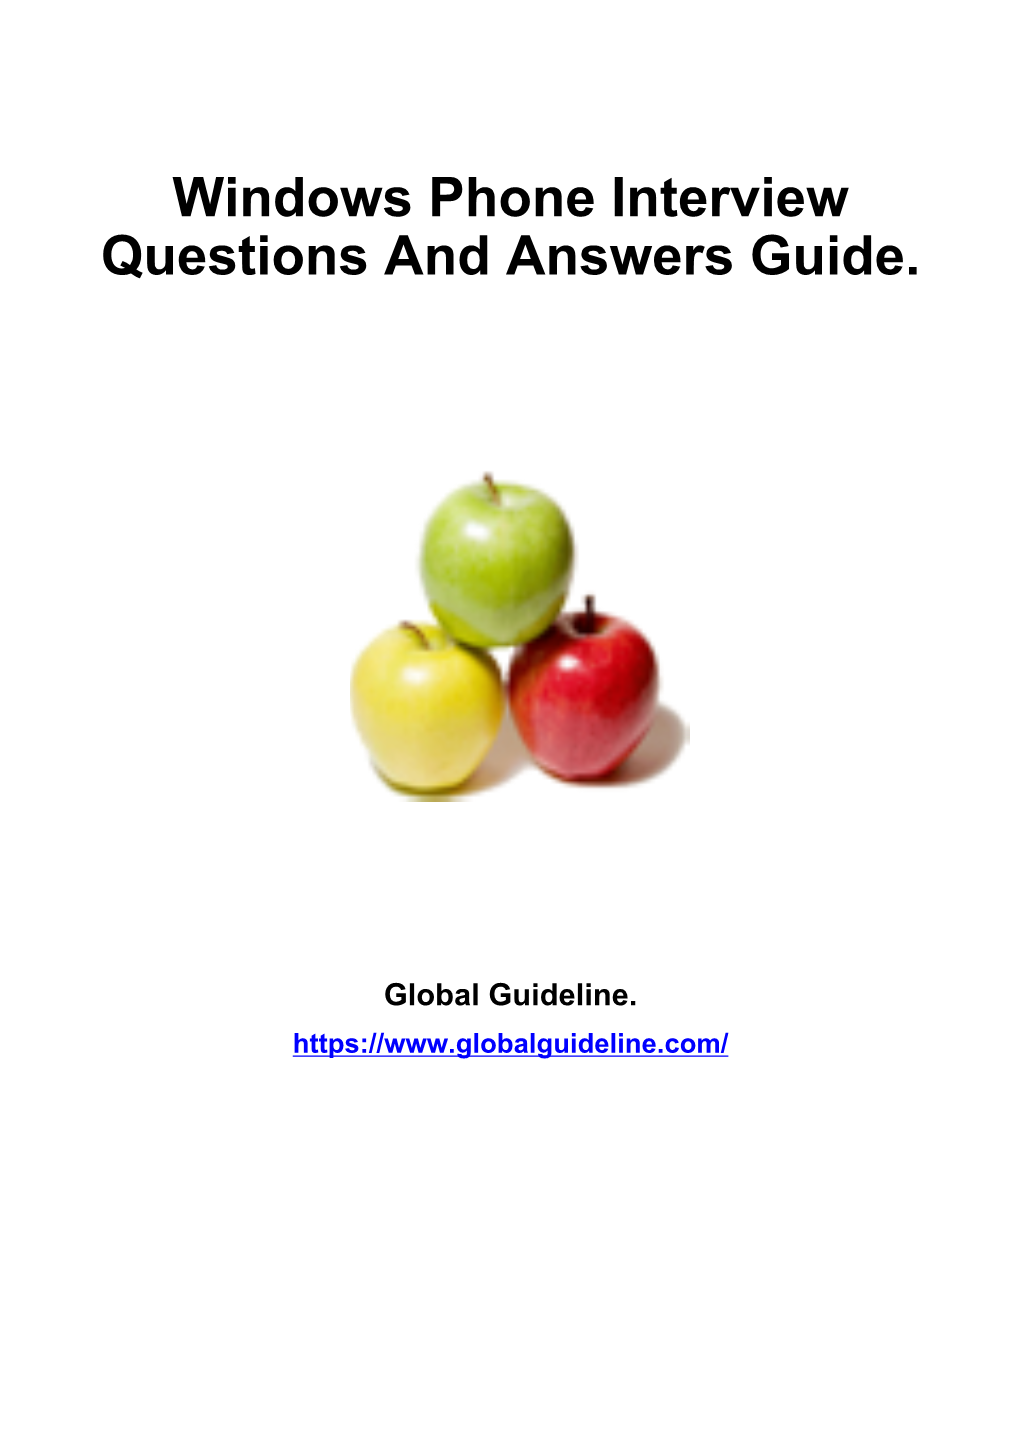 Windows Phone Interview Questions and Answers Guide